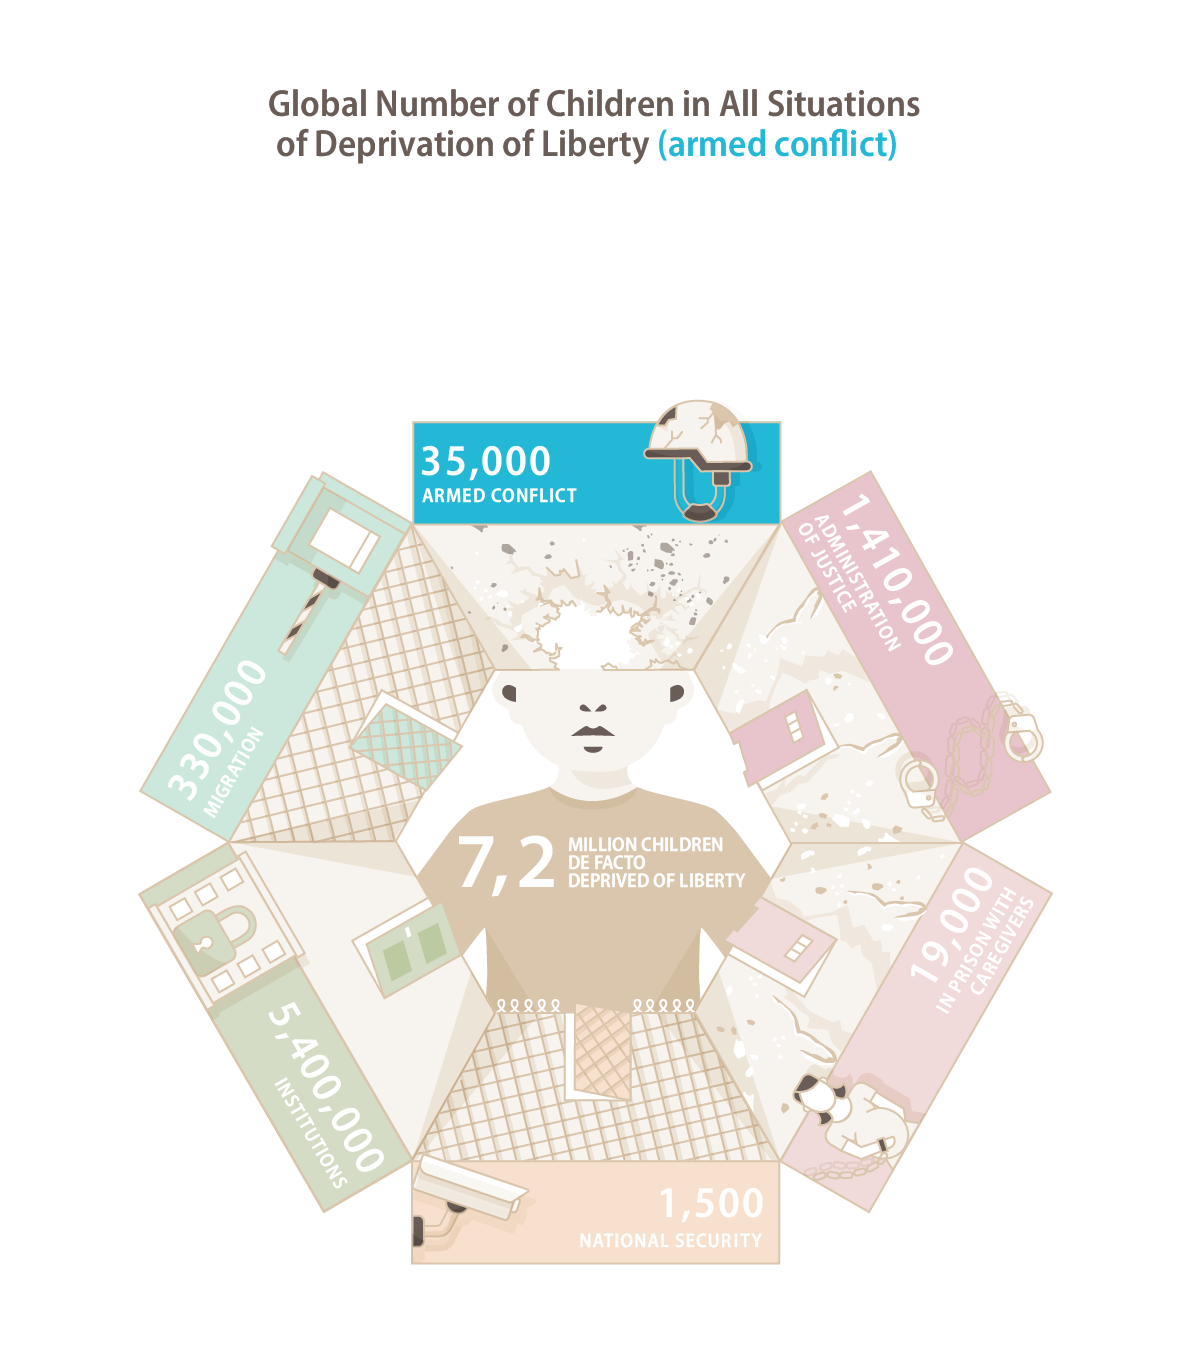 Global Number of Children in All Situations of Deprivation of Liberty (armed conflict)